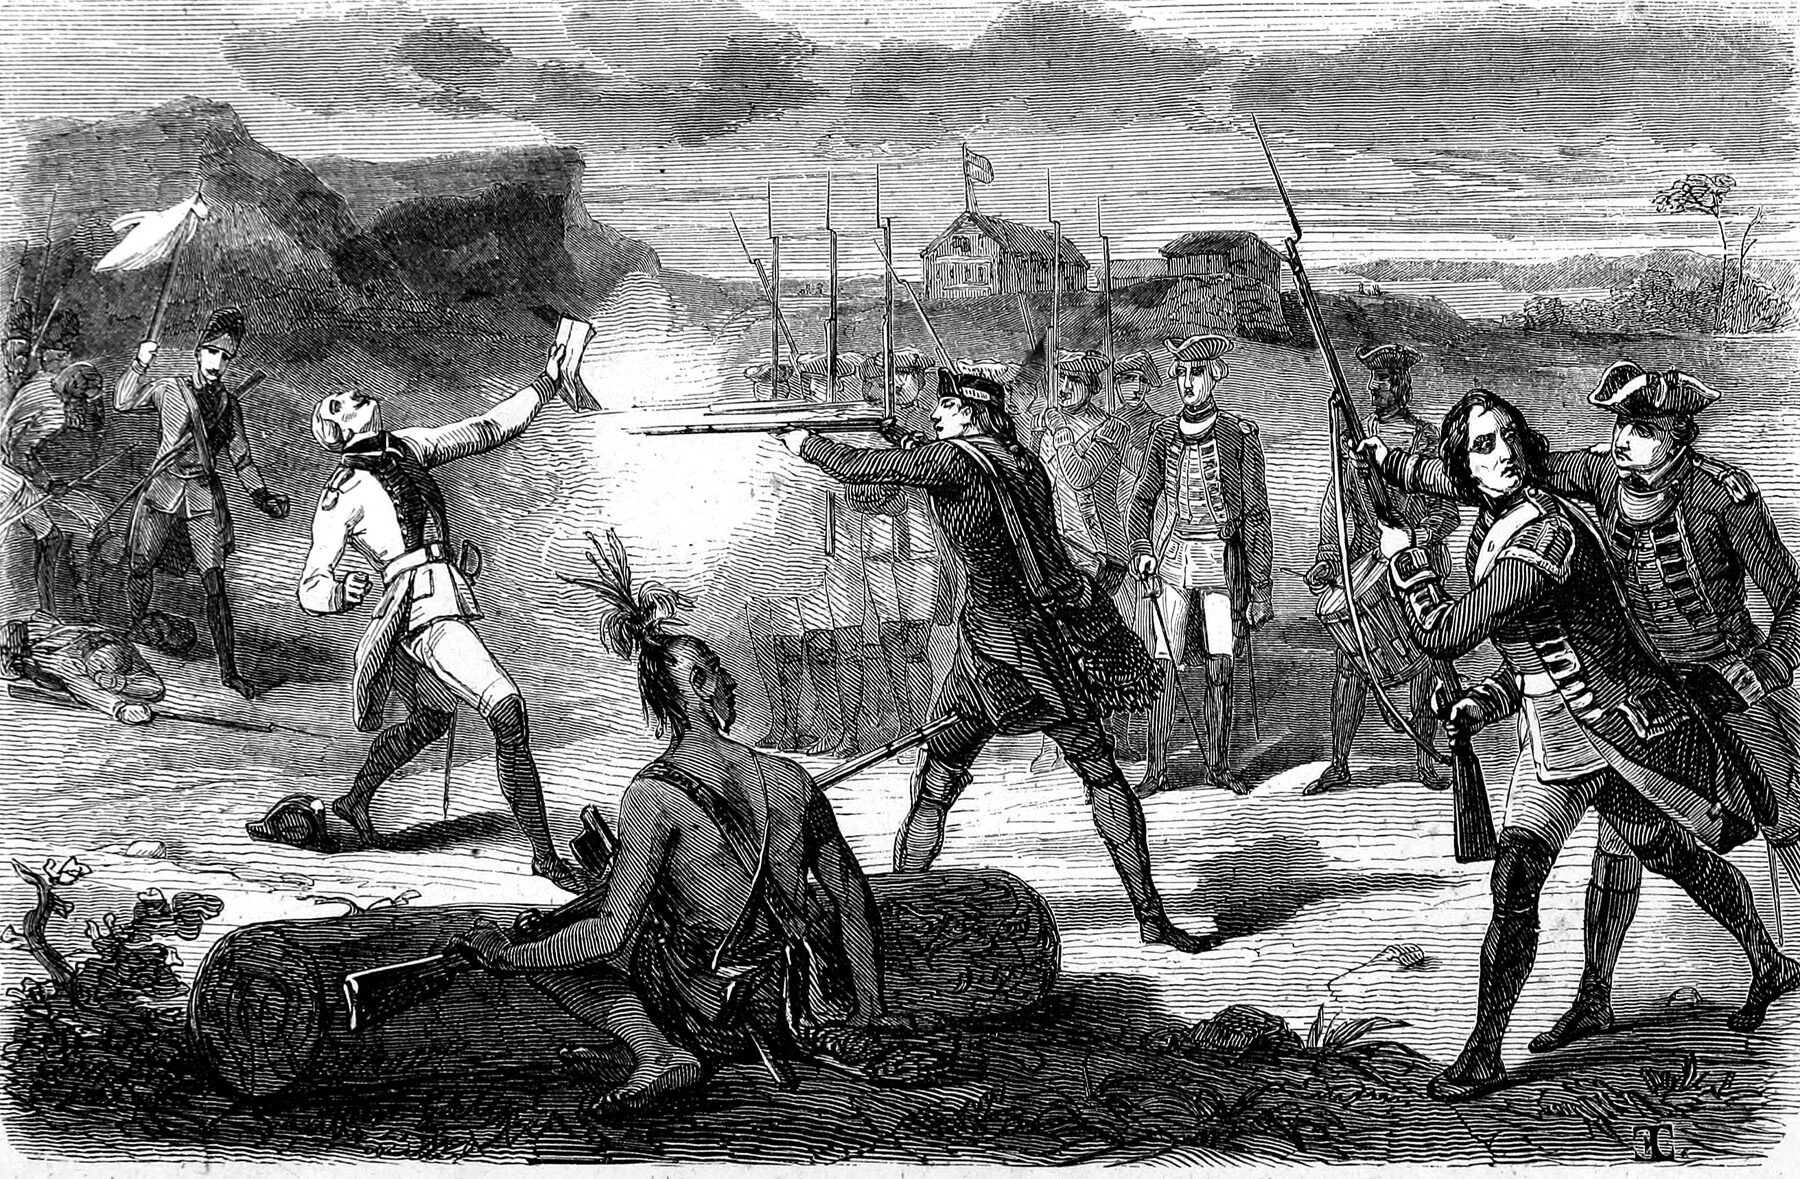 Soldiers of the Virginia Regiment ambushed a force of French and Indians from Fort Duquesne in a remote ravine in May 1754, escalating hostilities between the rival powers. Among the dead was the party’s commanding officer, Ensign Joseph Coloun de Villers de Jumonville, after whom the skirmish was named.